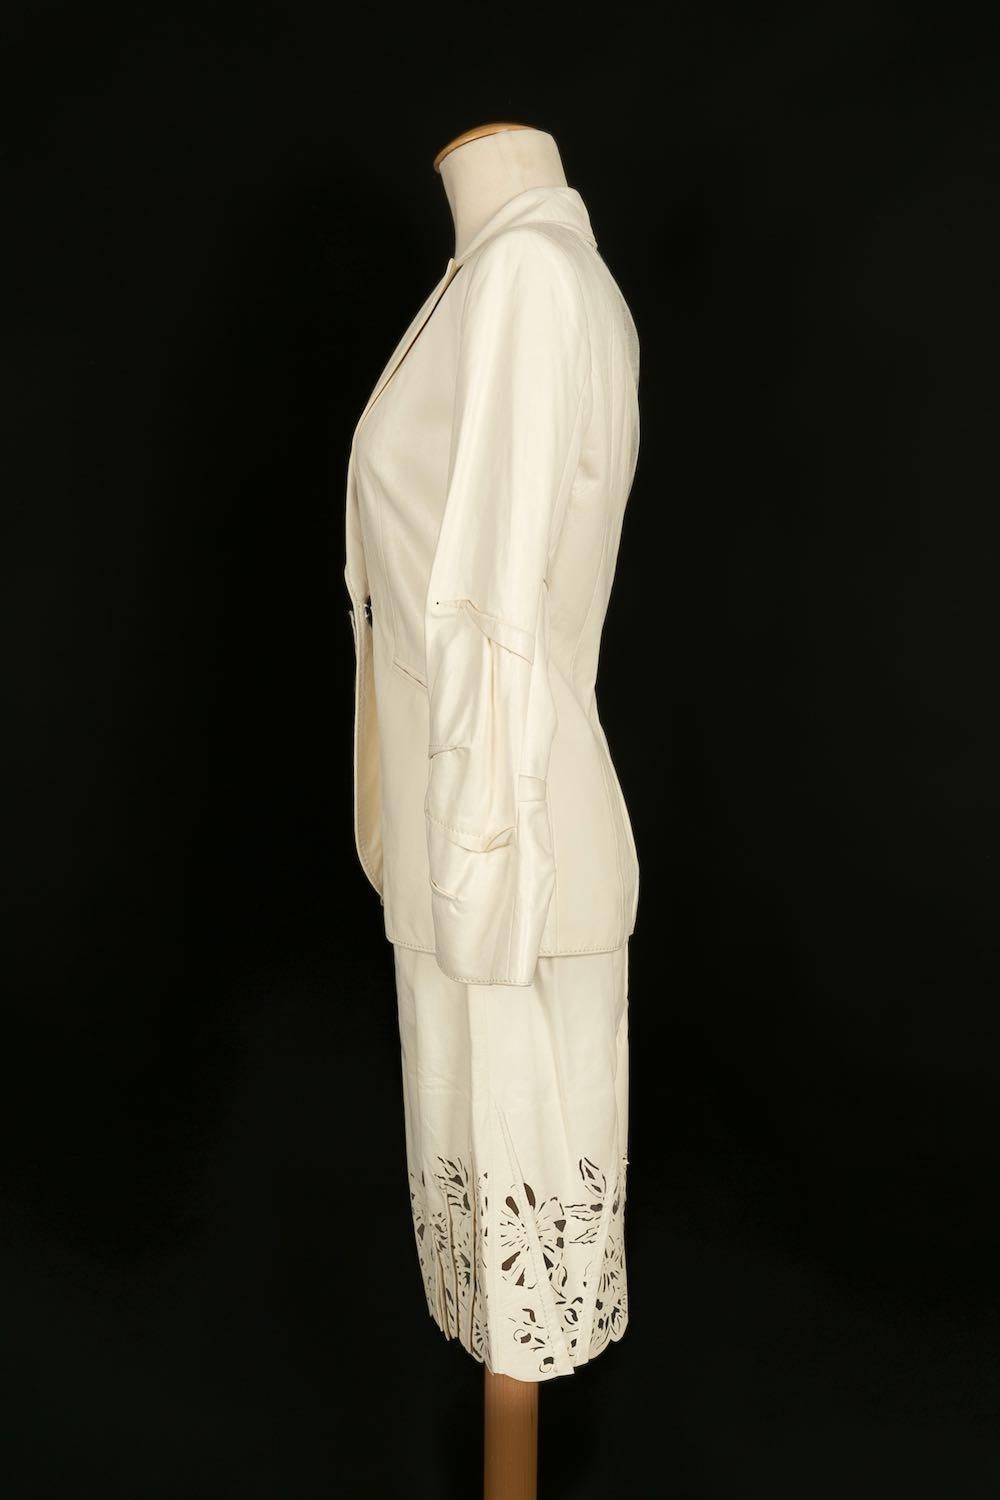 Dior - (Made in France) Off white lamb leather jacket and skirt set. Size 36FR.
Collection Autumn-Winter 2006. 

Additional information: 
Dimensions: Jacket: Shoulder width: 40 cm, Chest: 39 cm, Sleeve length: 58 cm, Length: 62 cm 
Skirt: Size: 37